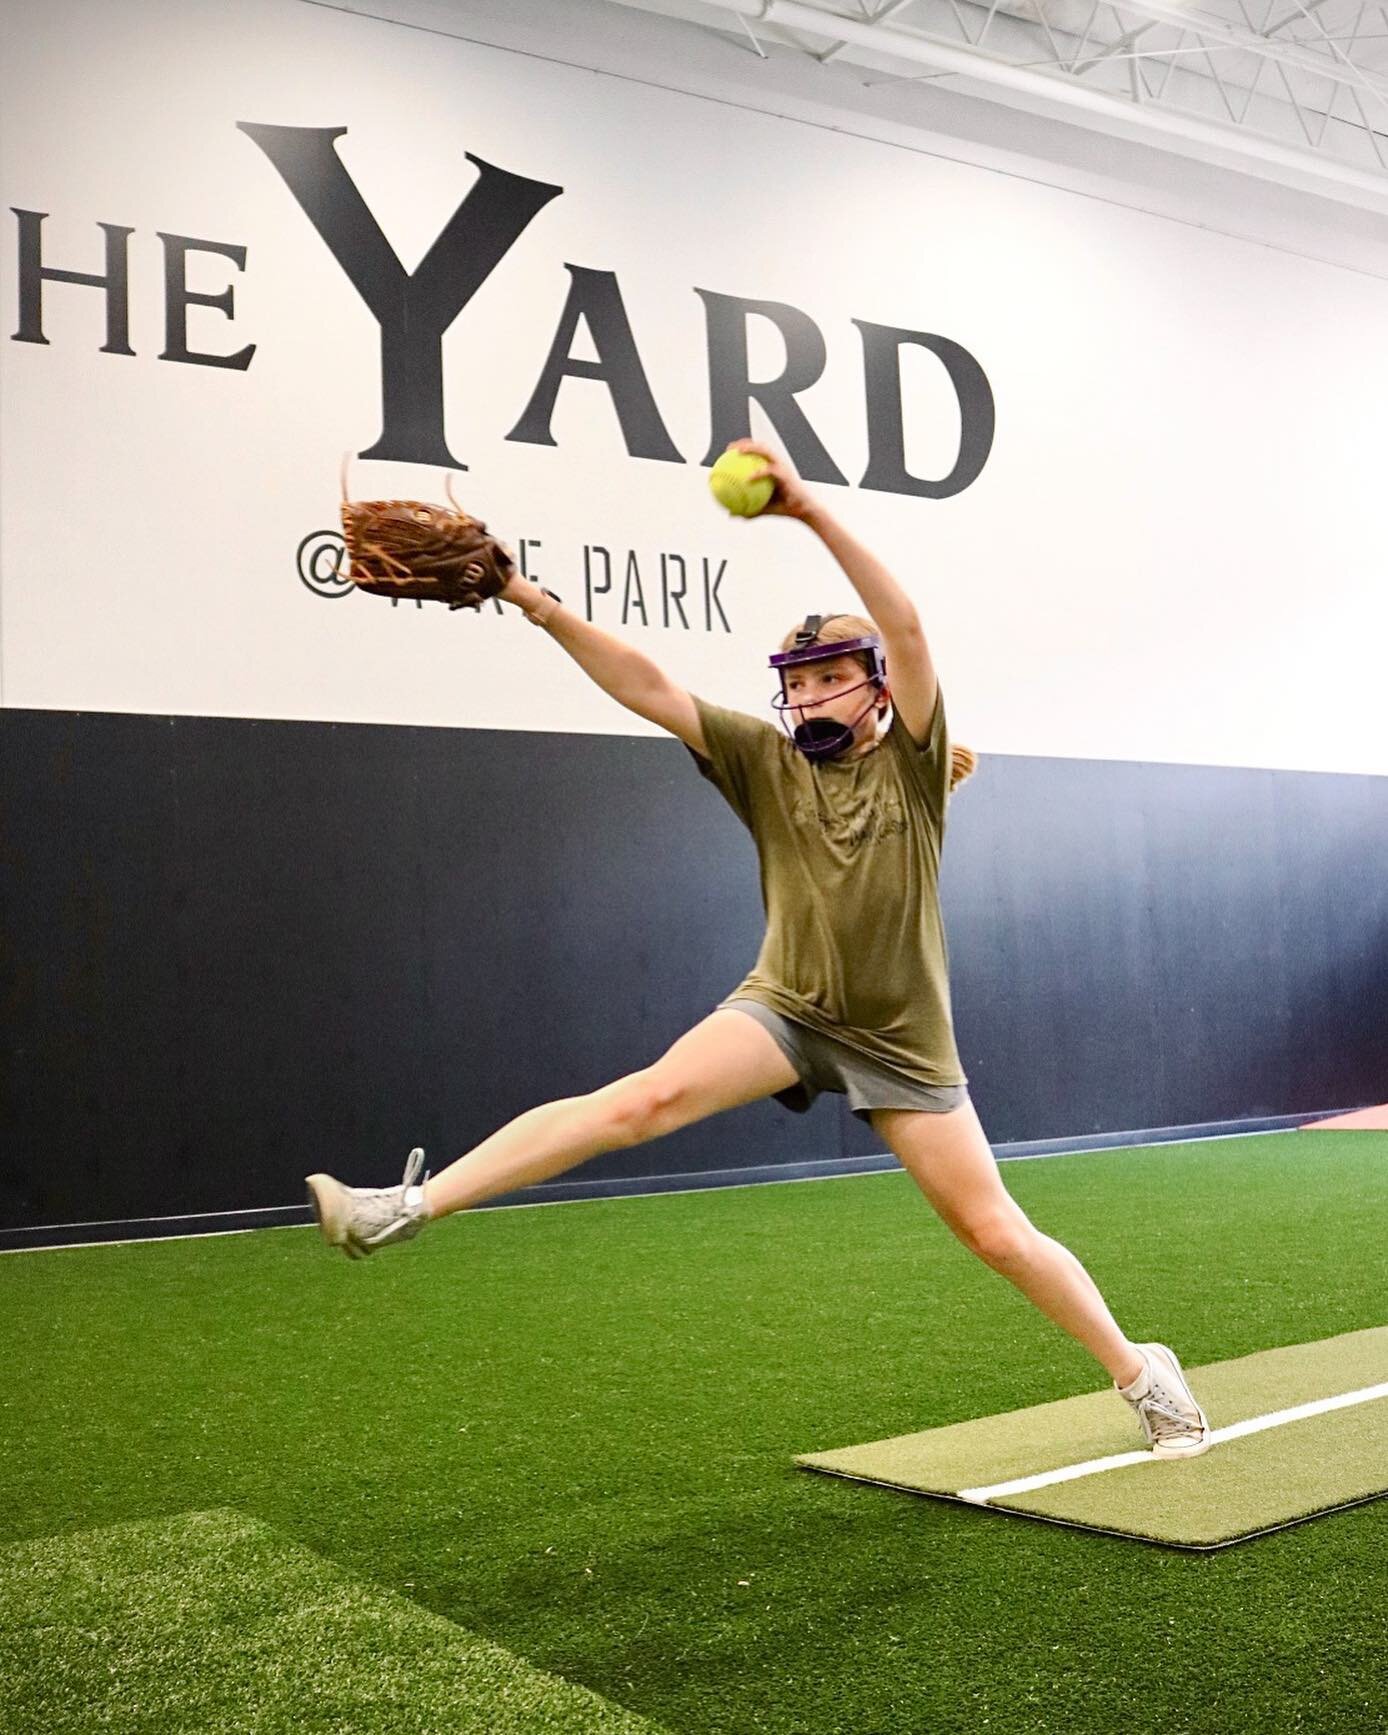 🚨New addition to Saturday&rsquo;s at The Yard! 🚨
🥎Softball Pitching Clinics 🥎
Led by Kim Thomas 

Saturday Mornings 
9:00am - 8-10U Softball Pitching Fundamentals 
10:00am - 11u+ Softball Pitching Clinics 

$25 per clinic
Register now in The Yard